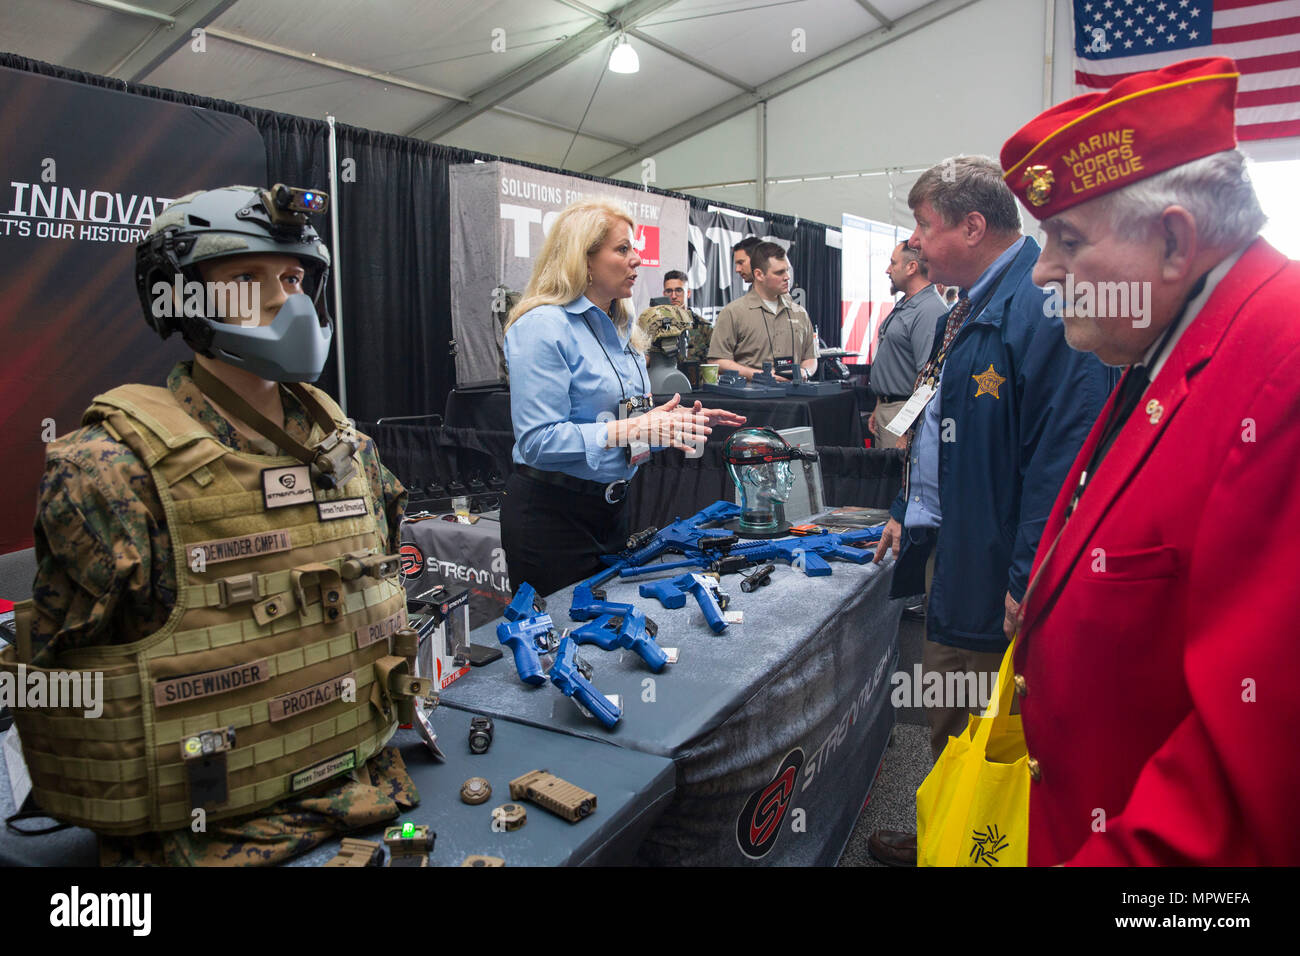 Sherry Lyons, regional military and federal division sales manager for Streamlight Inc., speaks with spectators about the display of weapons during the Marine South Military Exposition, Goettege Field House, Camp Lejeune N.C., April 13, 2017. The Marine South Exposition is sponsored by the Marine Corps League and is a forum for defense contractors to display, inform, and promote the latest in defense equipment and technology. (U.S. Marine Corps photo by Lance Cpl. Ashley D. Gomez) Stock Photo